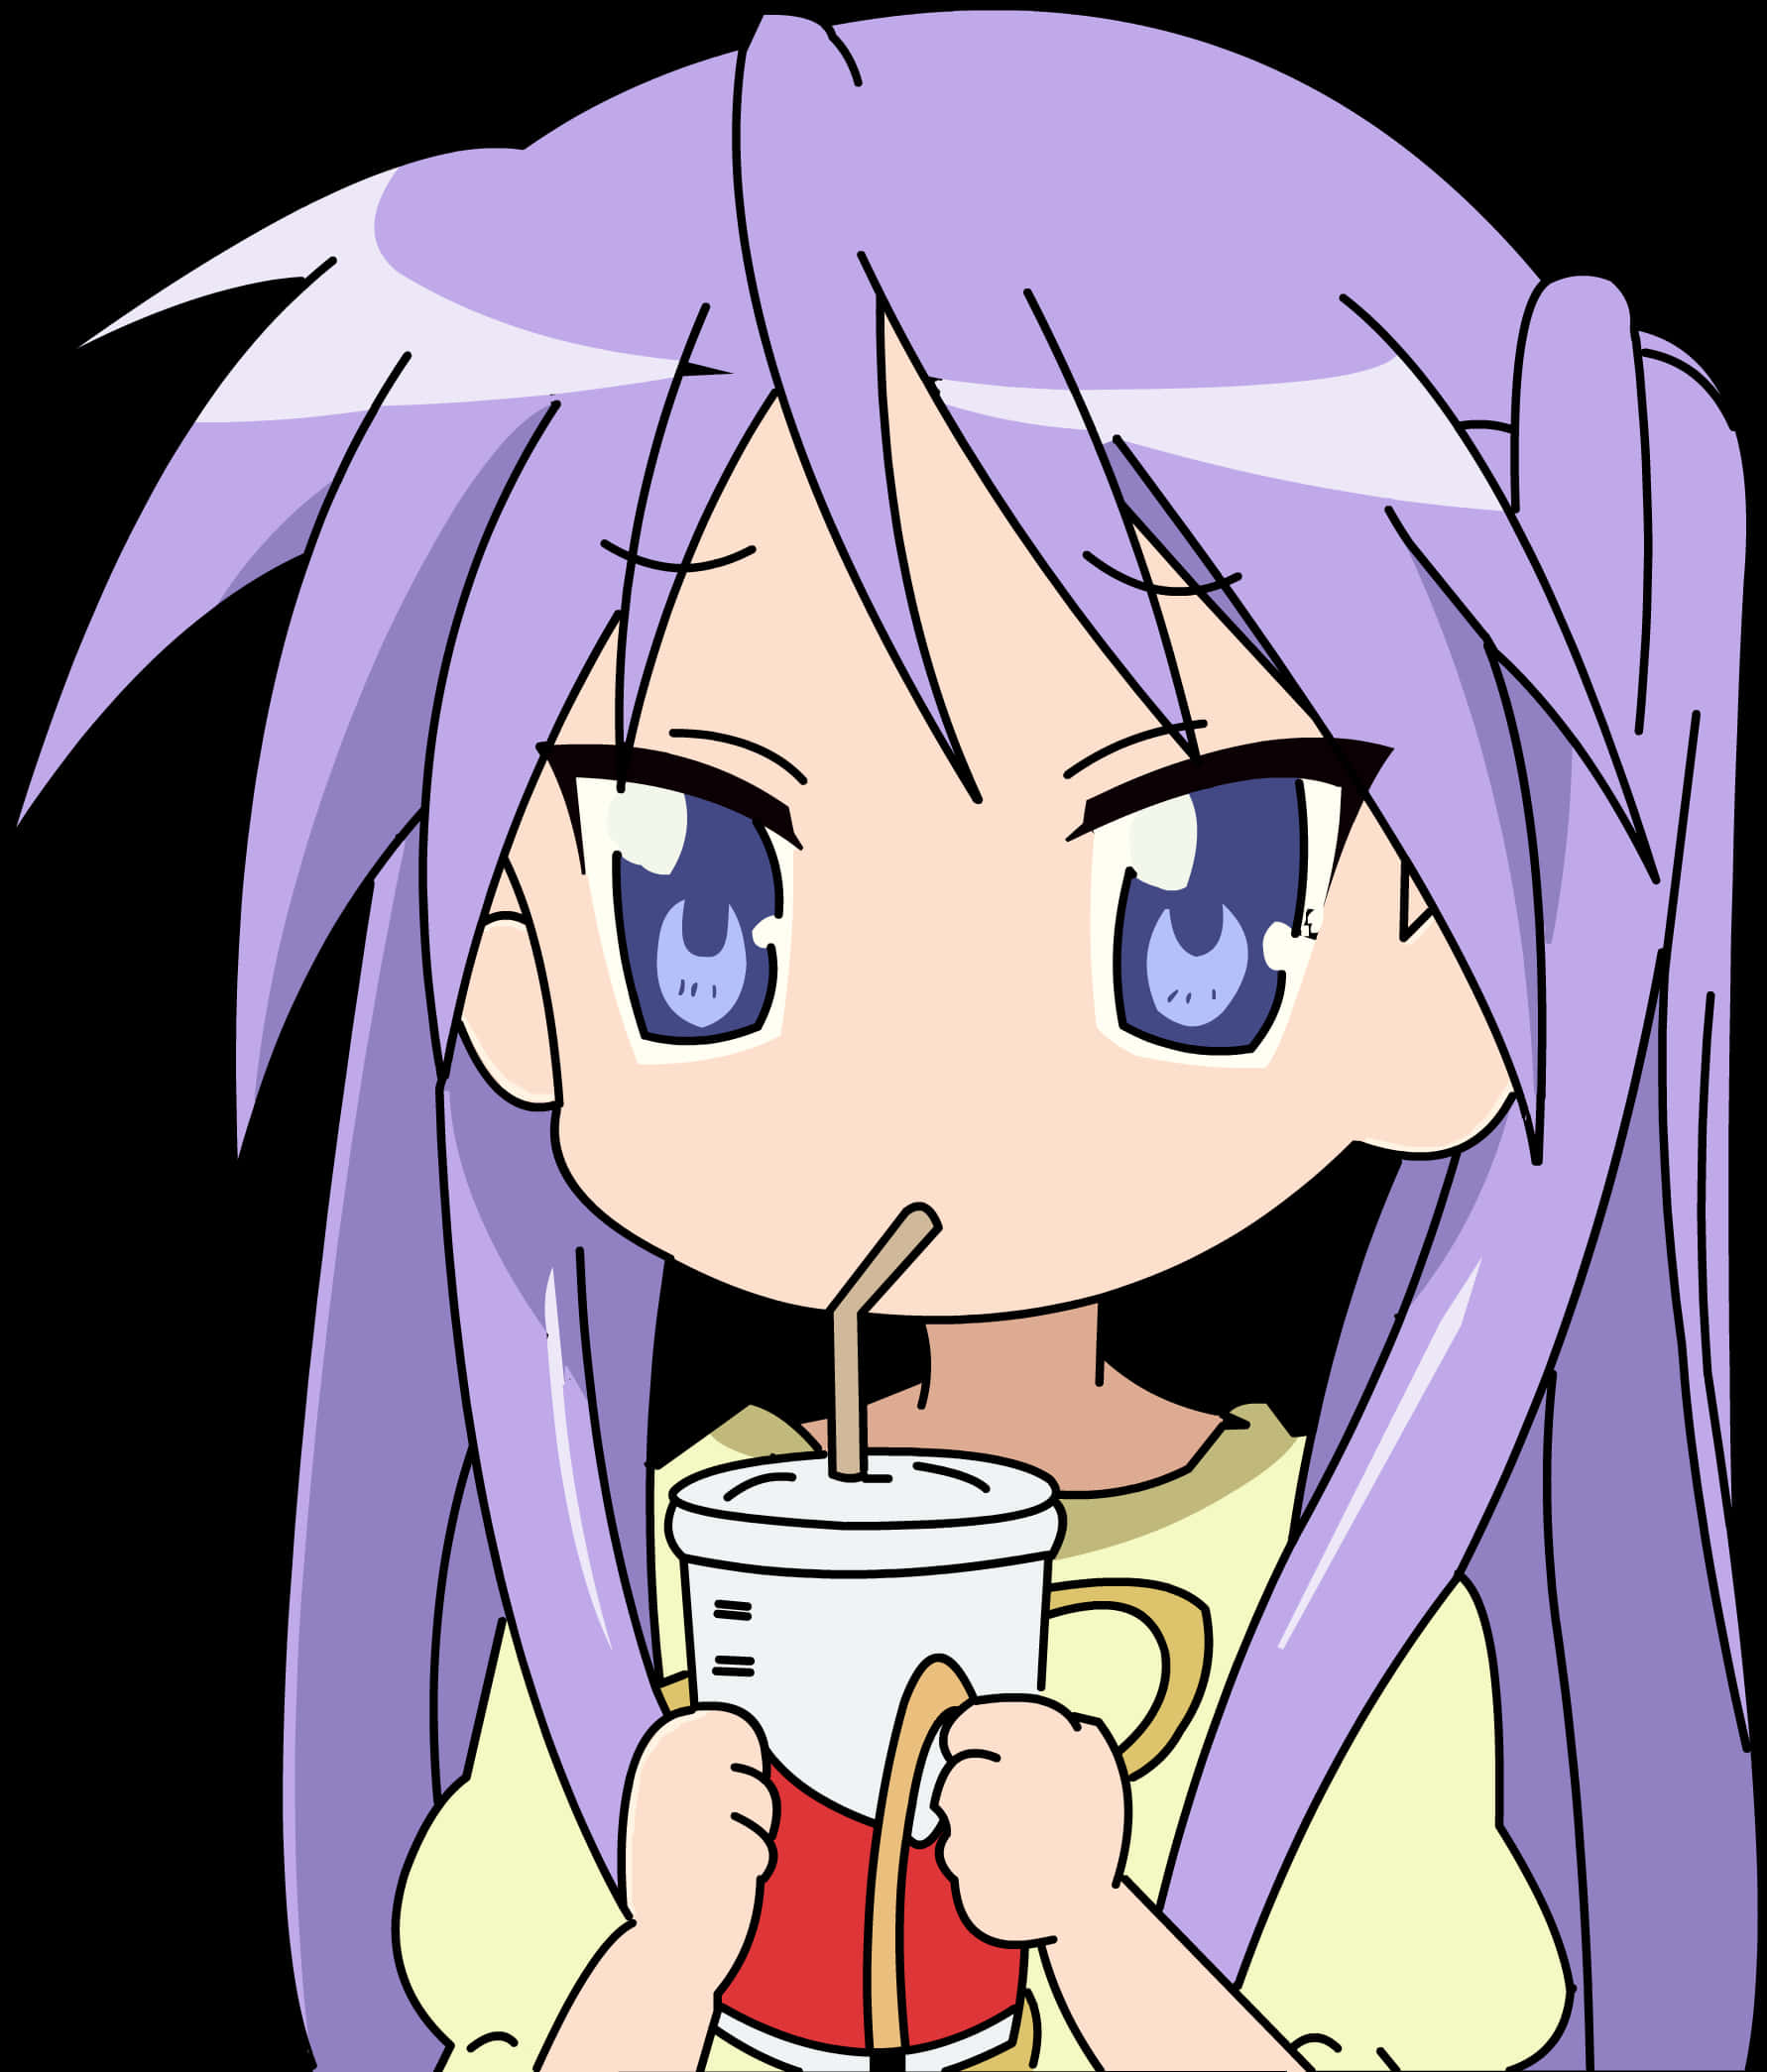 Anime Girl Drinking From Straw